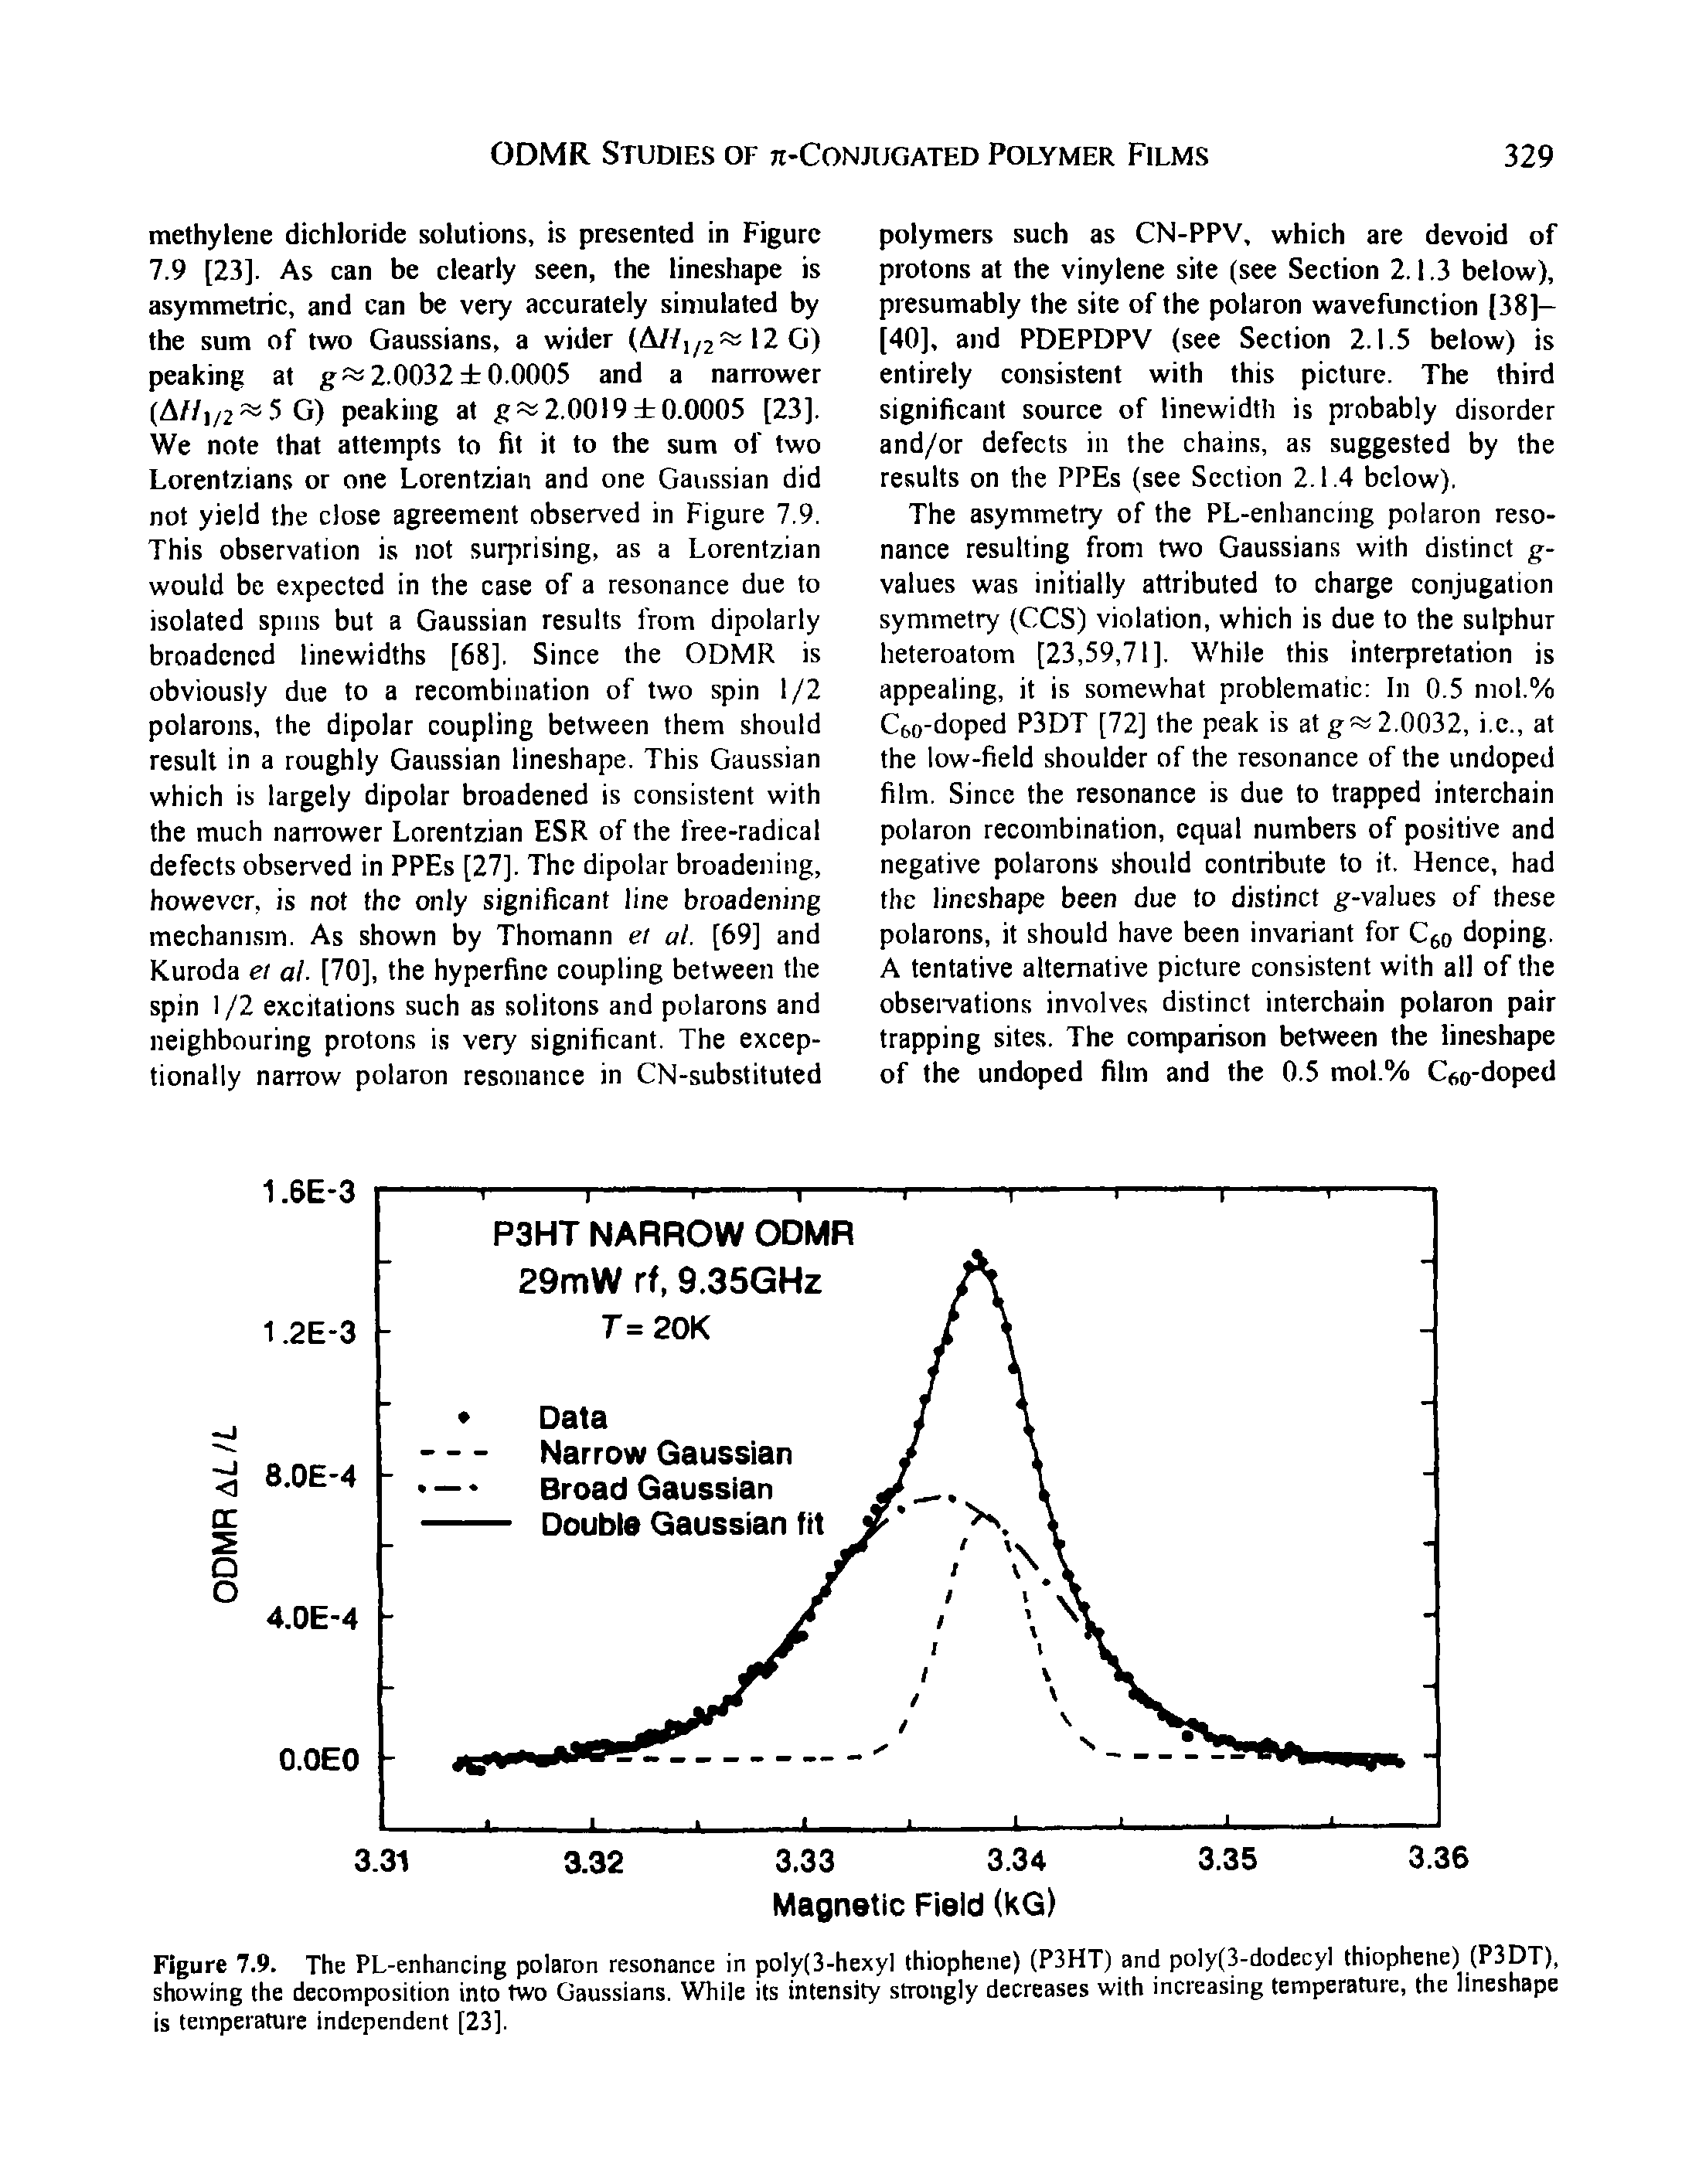 Figure 7.9. The PL-enhancing polaron resonance in poly(3-hexyl thiophene) (P3HT) and poly(3-dodecyl thiophene) (P3DT), showing the decomposition into two Gaussians. While its intensity strongly decreases with increasing temperature, the lineshape is temperature independent [23].